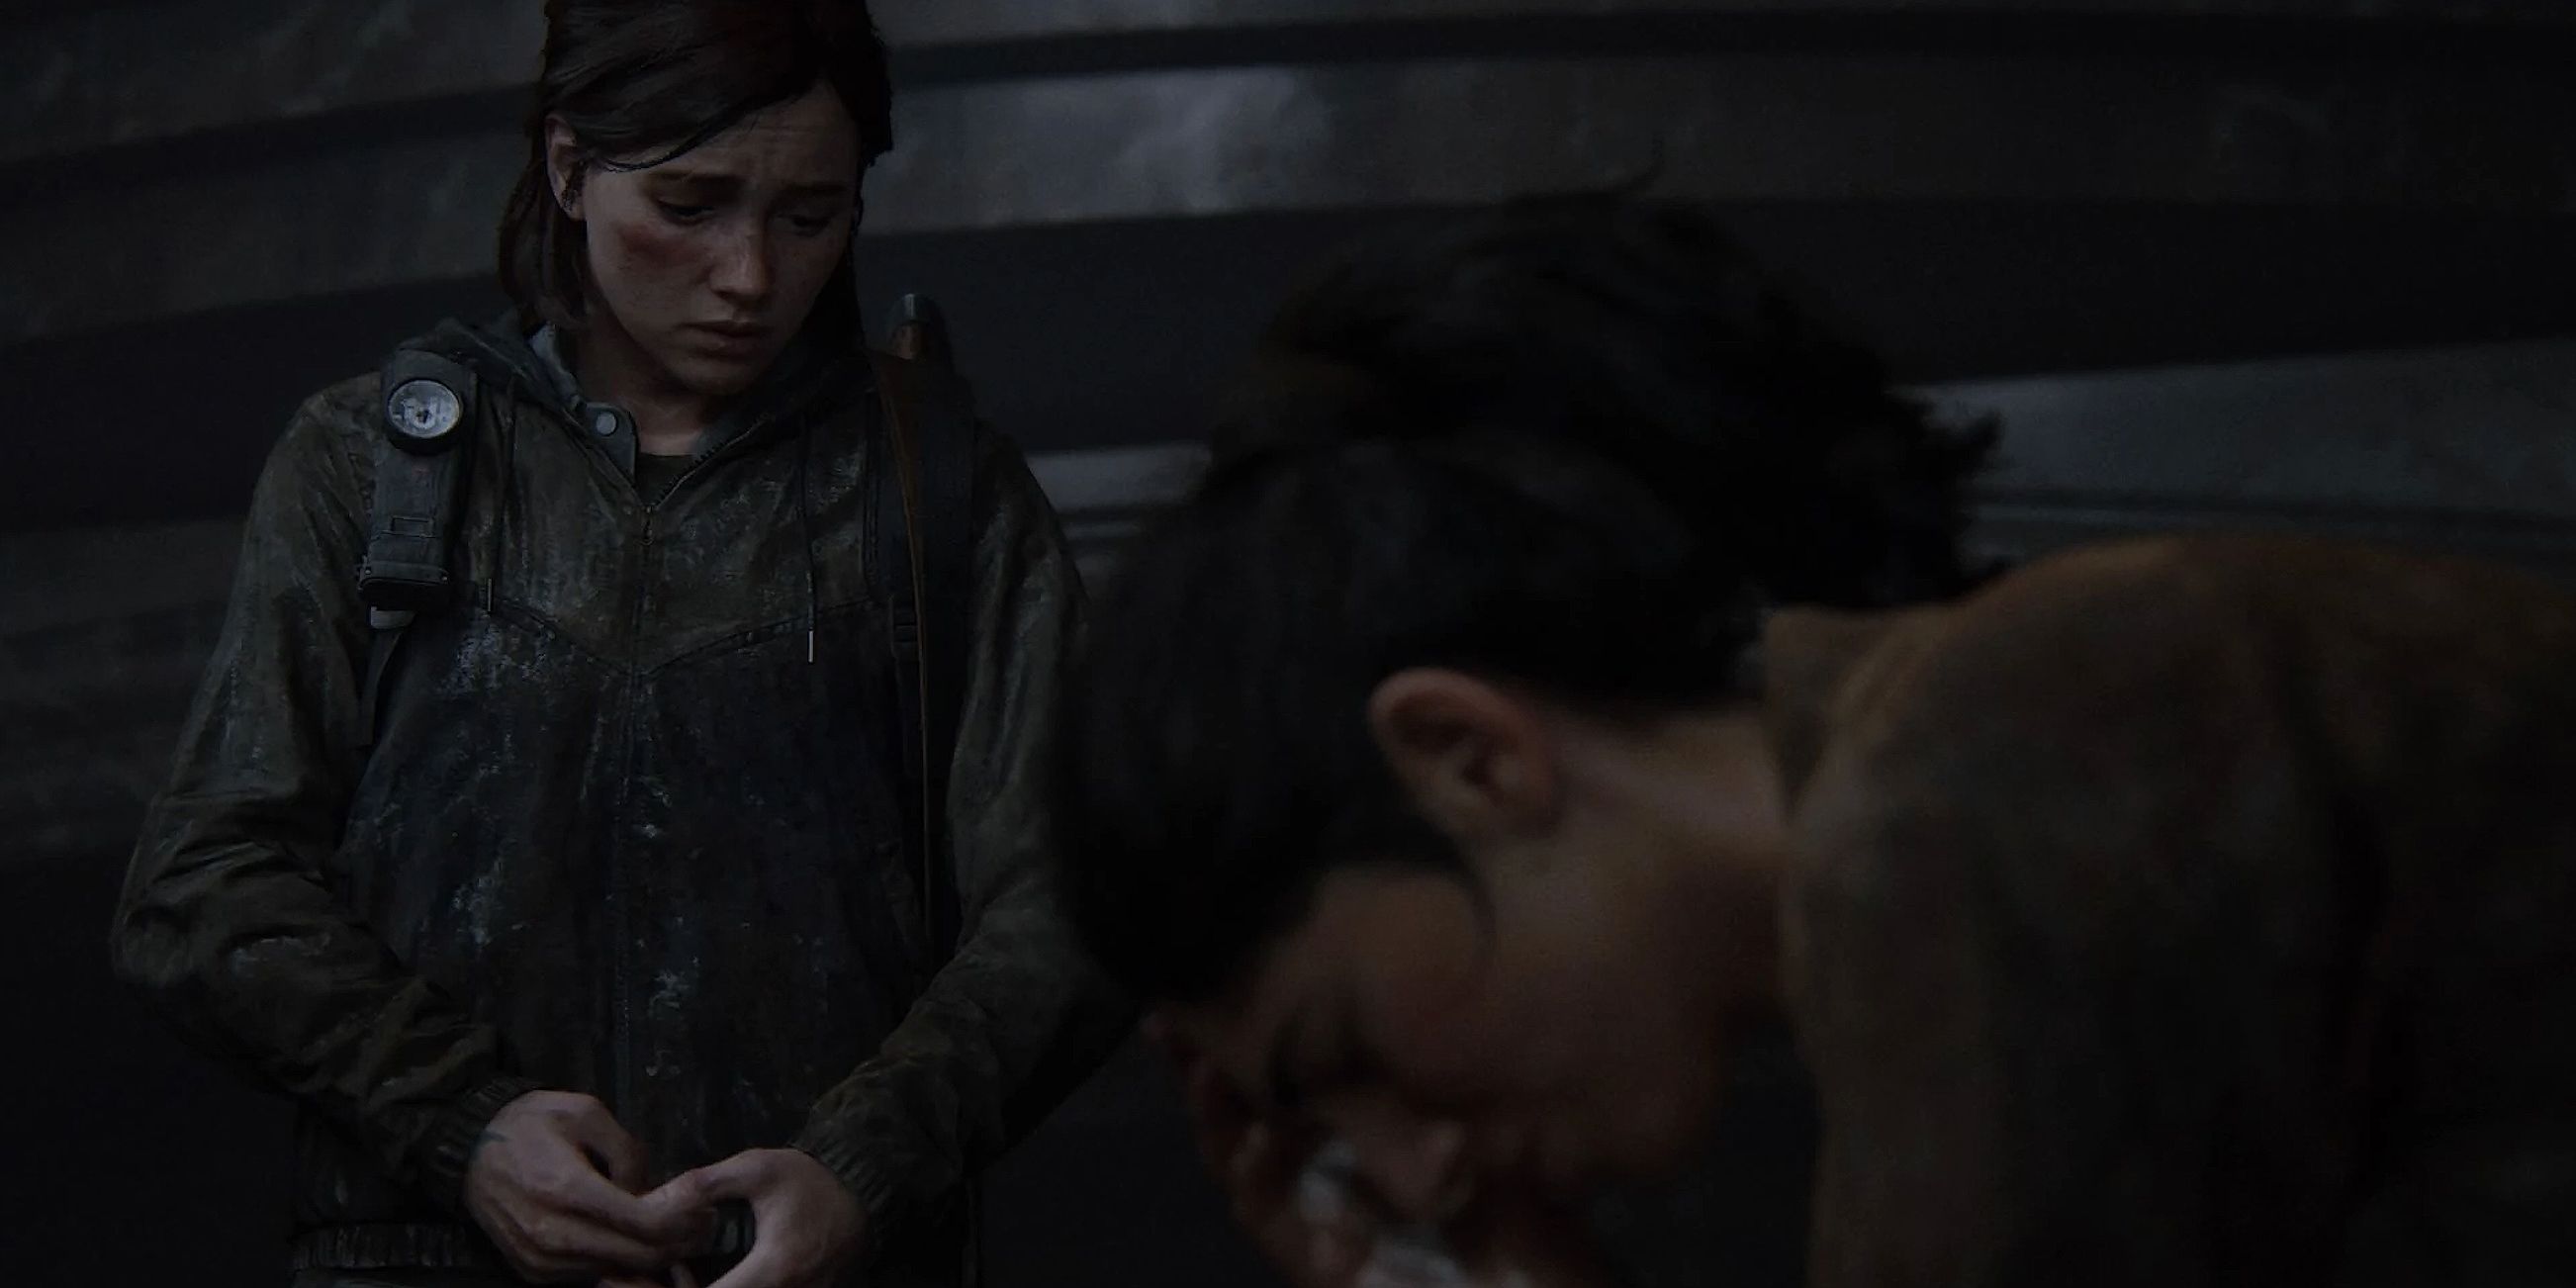 Ellie and Dina from The Last of Us 2